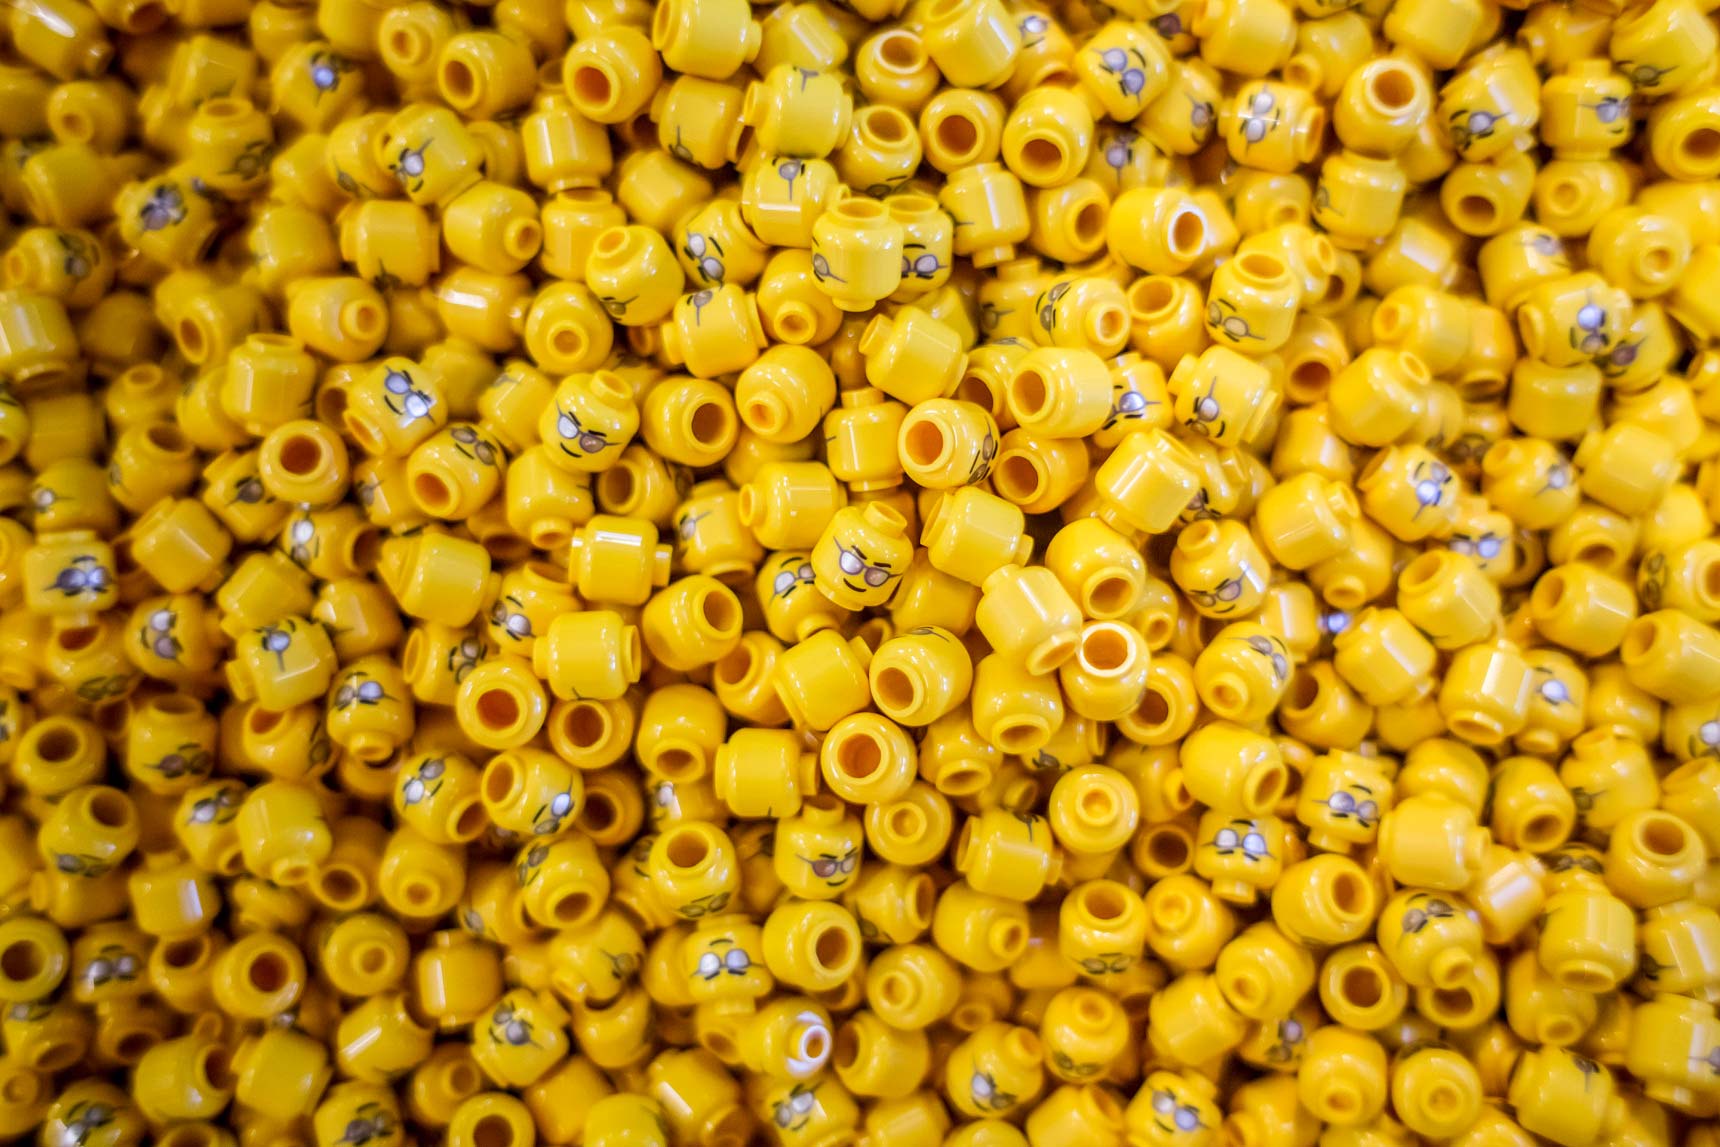 Lego Production and Packaging At The Newly Expanded Lego A/S Factory